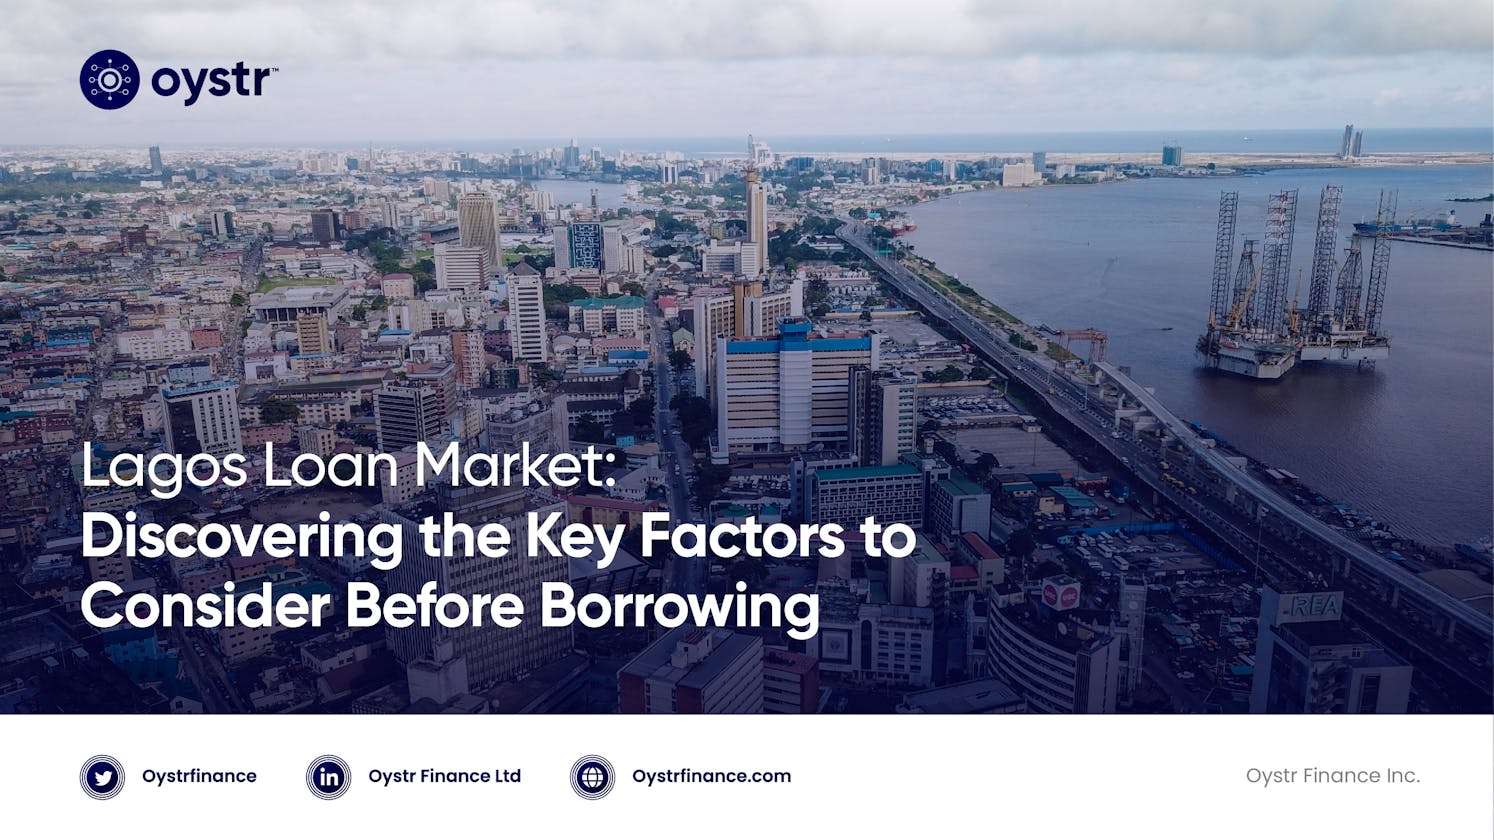 Lagos Loan Market: Discovering the Key Factors to Consider Before Borrowing